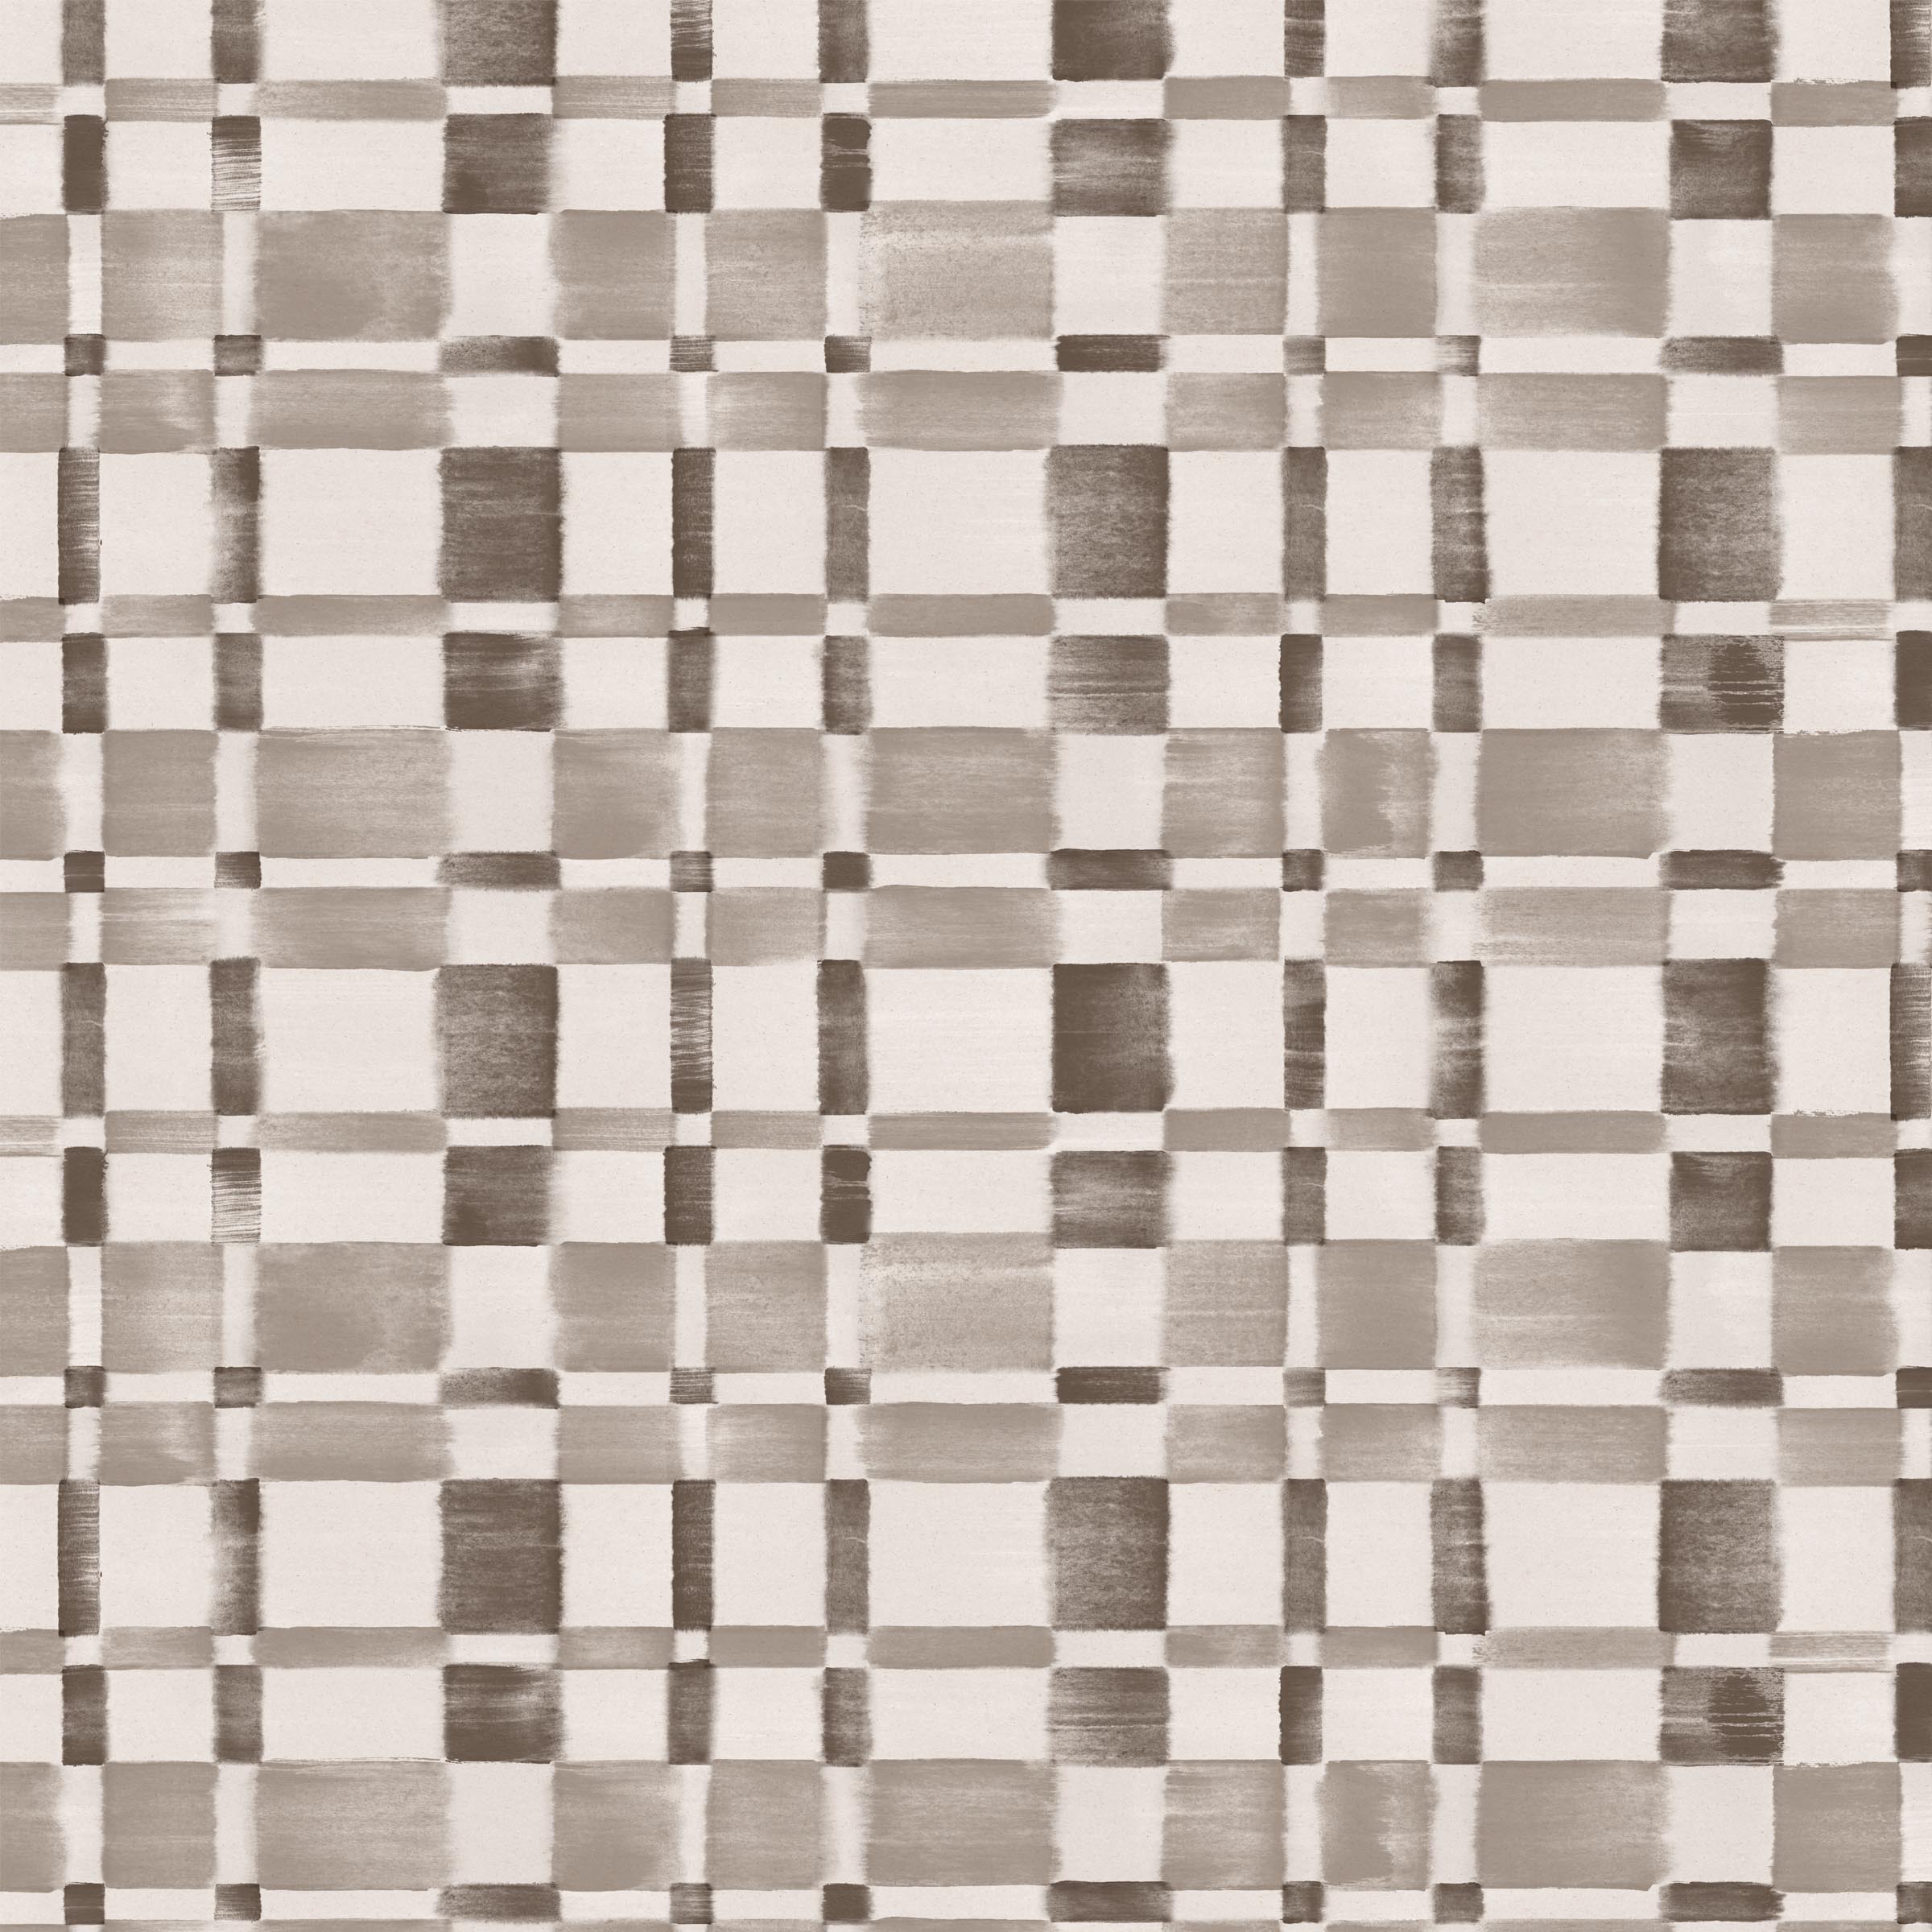 Detail of wallpaper in a large-scale checked pattern in shades of greige and white.